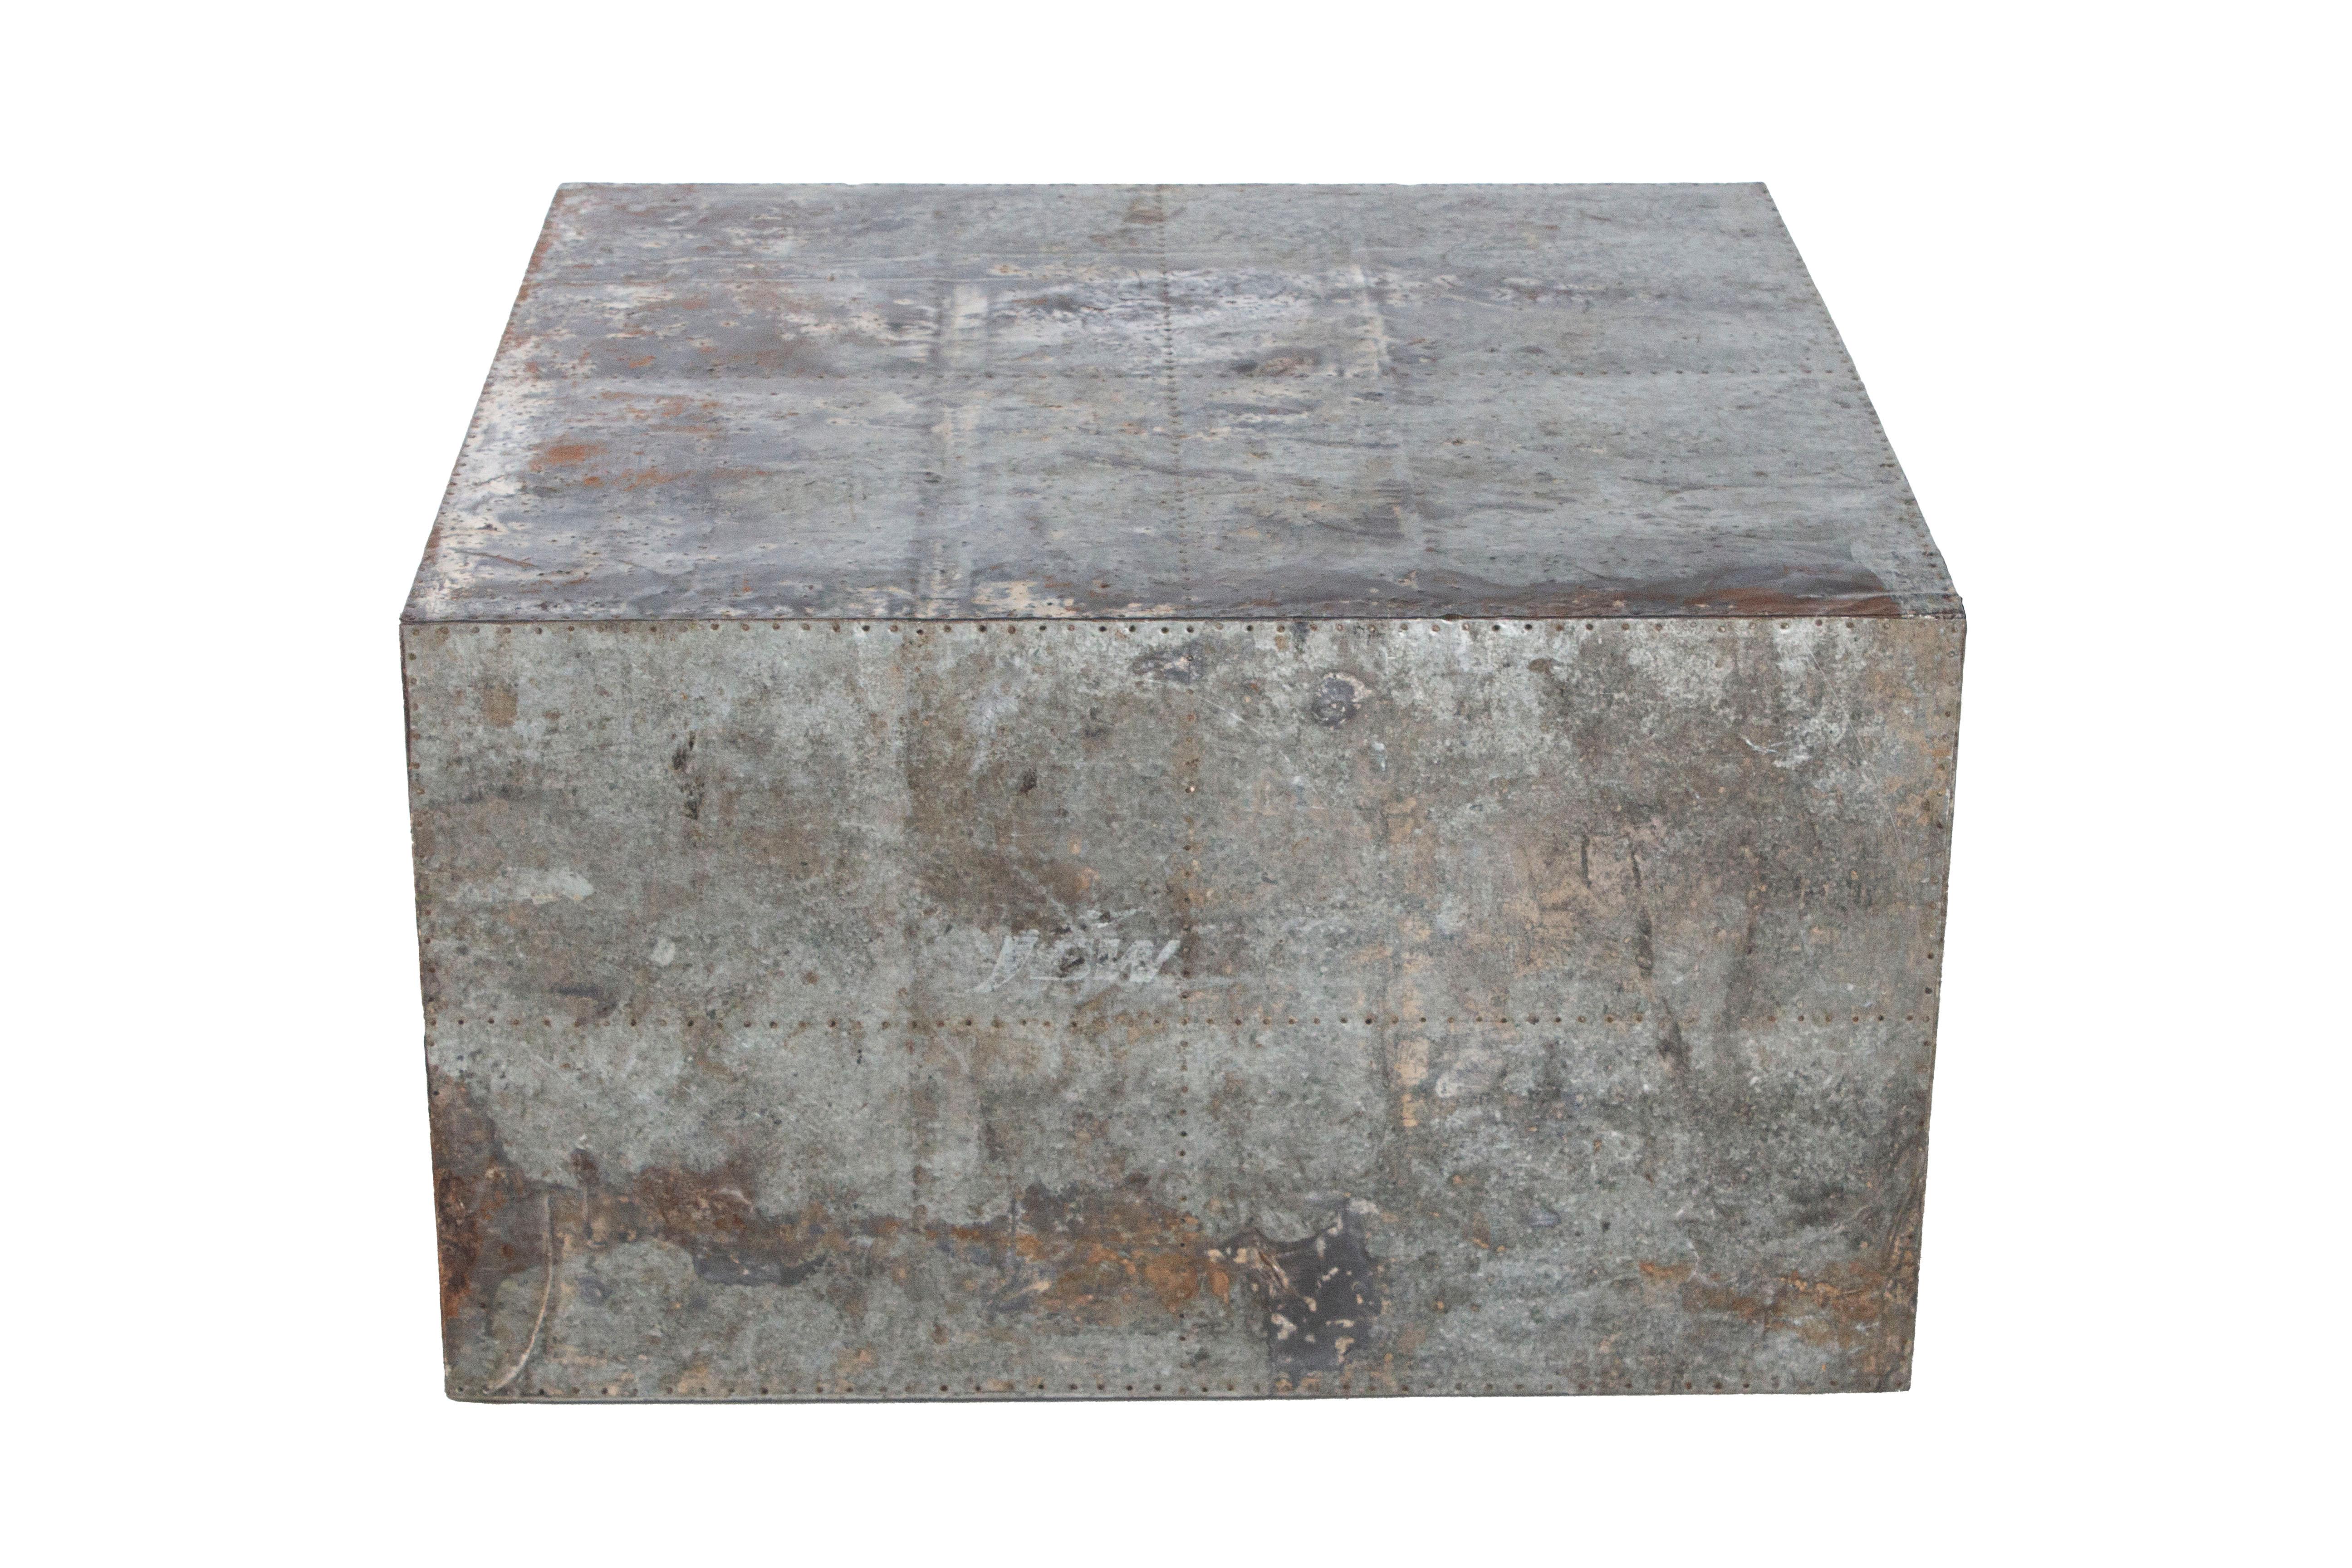 Block form coffee table made from repurposed zinc 

Architectural zinc form used as coffee table.
 